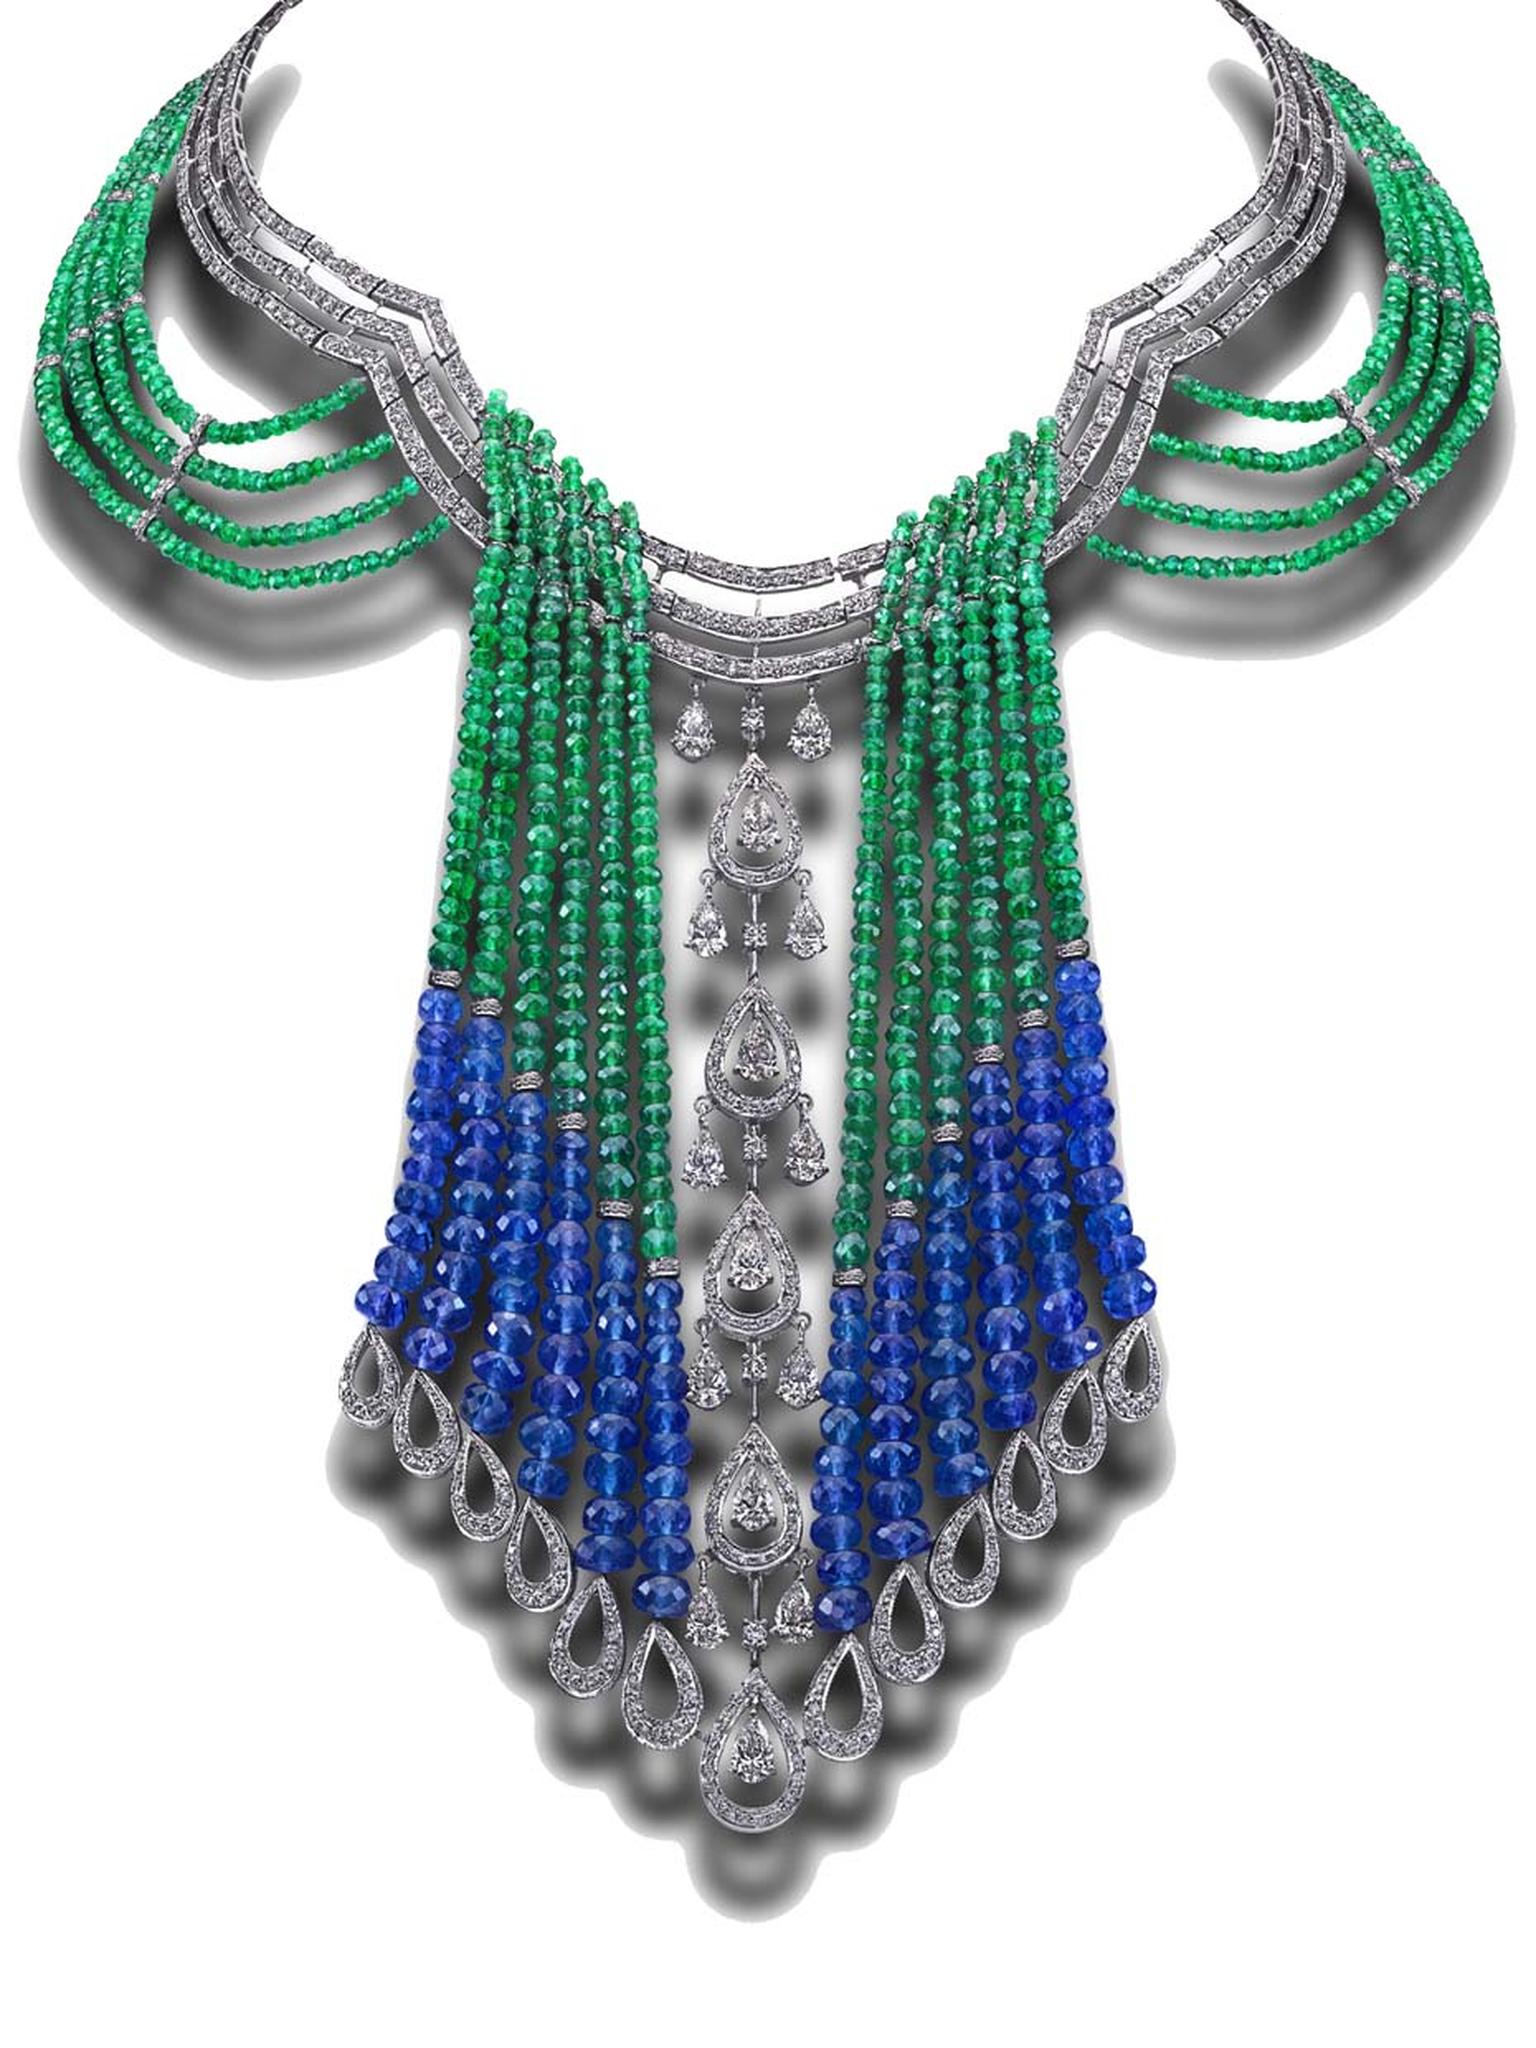 House of Rose emerald and tanzanite necklace with pear-shaped diamonds.